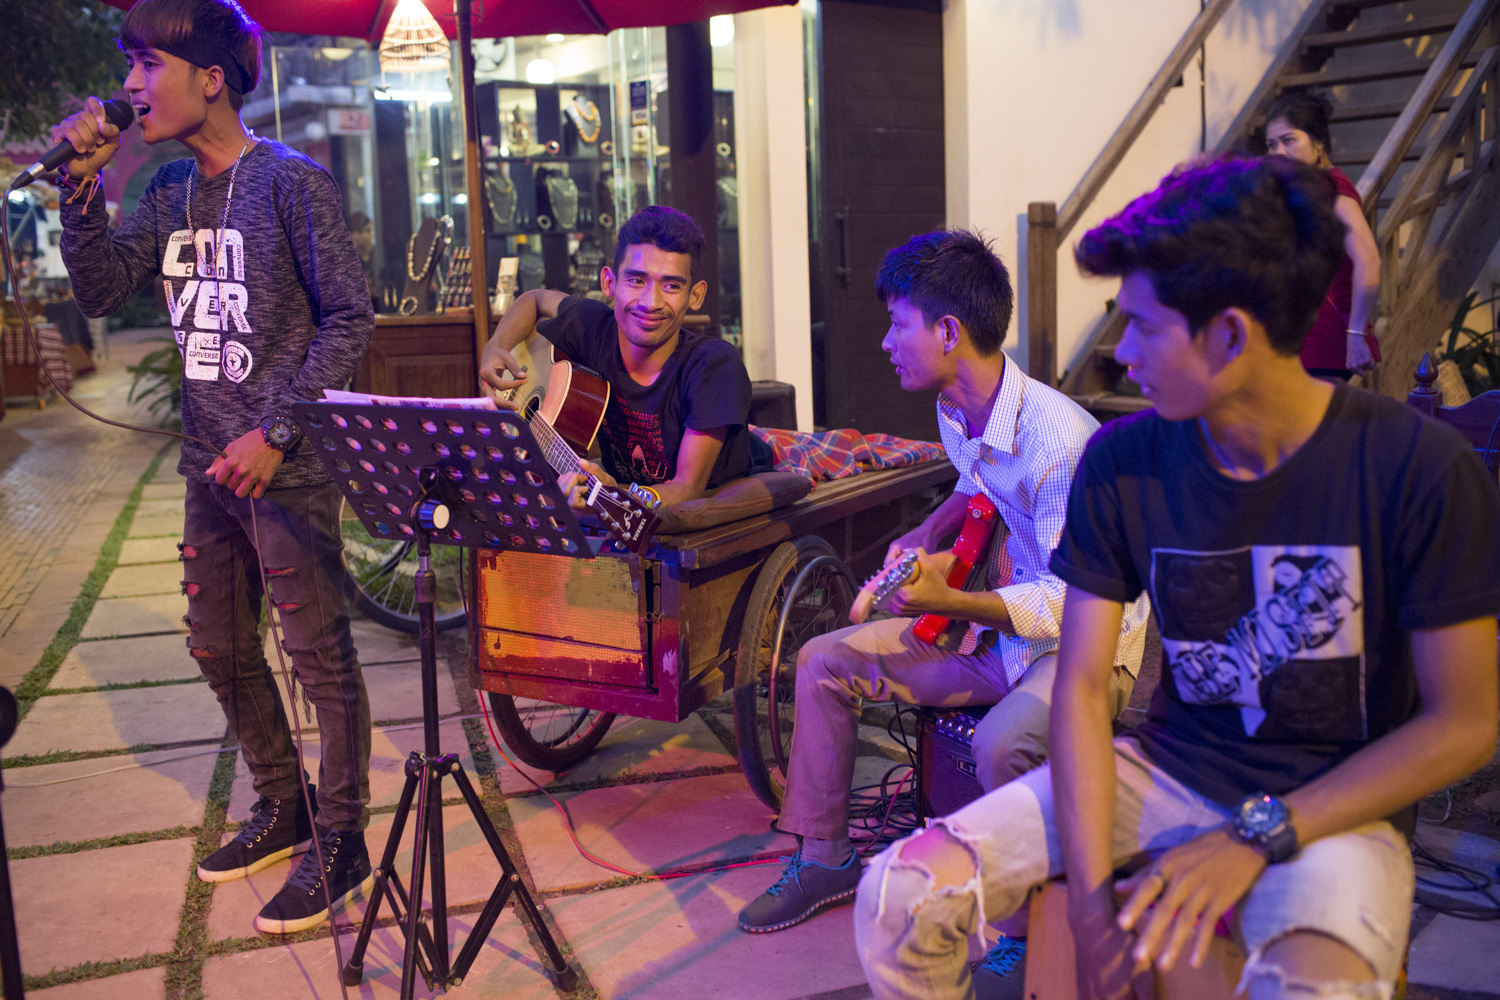 On Friday evenings, Sophanna performs with his acoustic band at an outdoor craft market in King’s Road Angkor, Siem Reap, Cambodia. Apart from writing songs, he teaches music for free, and eventually formed a band with some of his students.